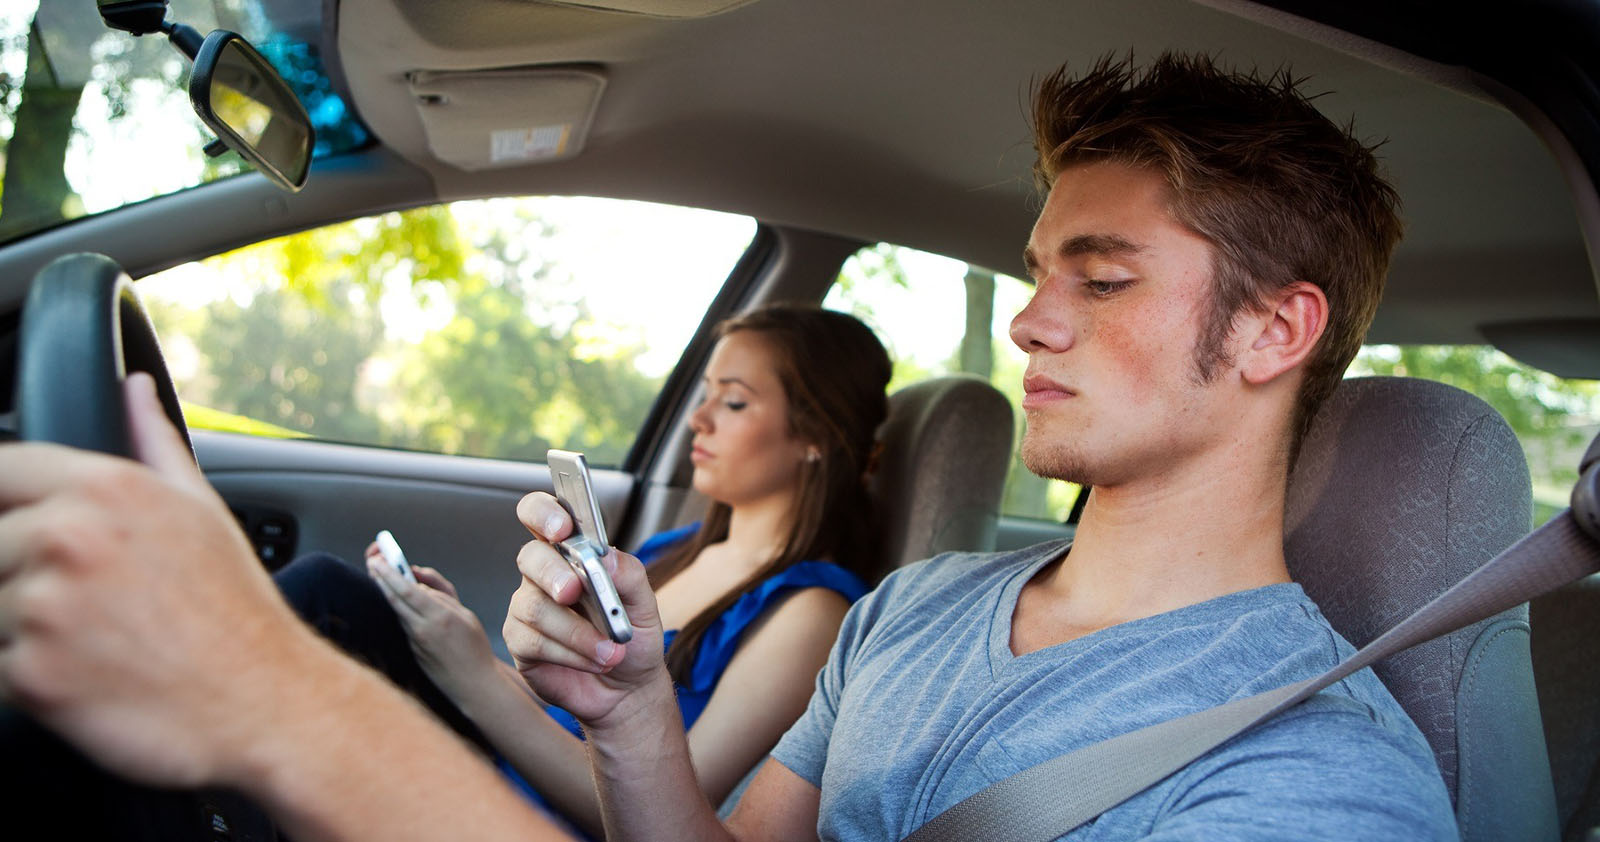 Man and woman texting while driving